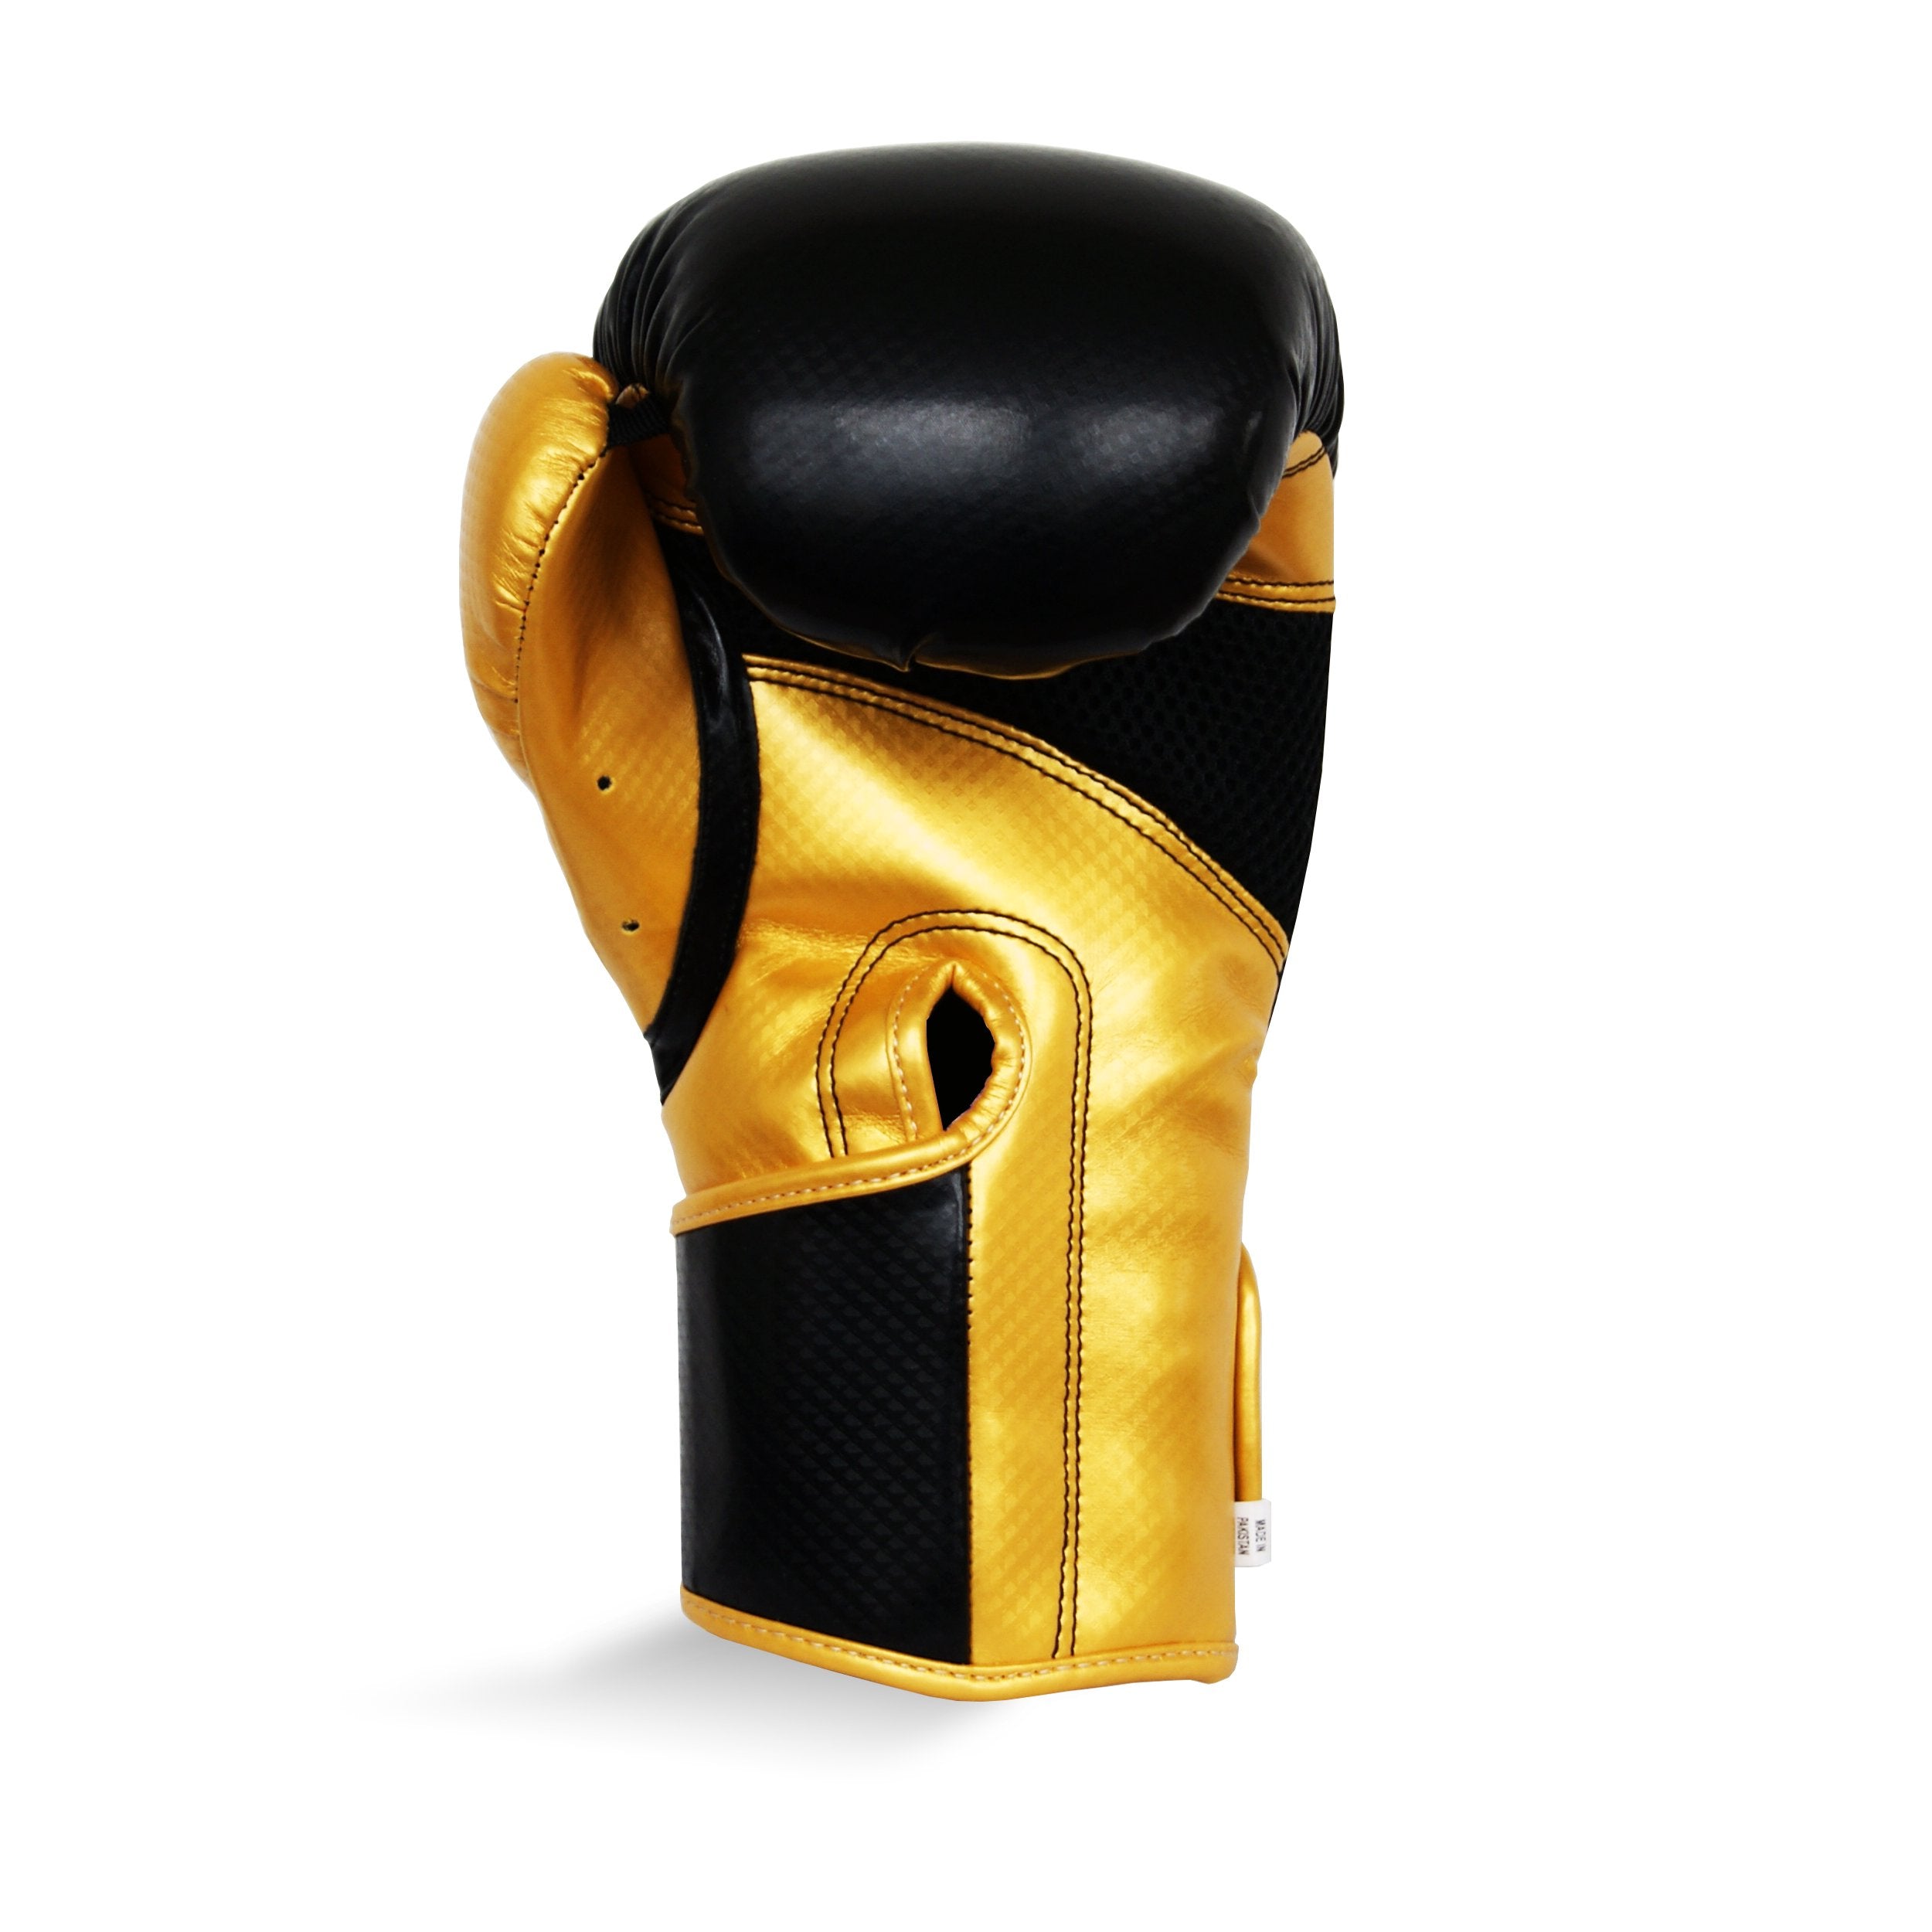 Pro Fitness Synthetic Leather Boxing Glove Metallic Black / Gold